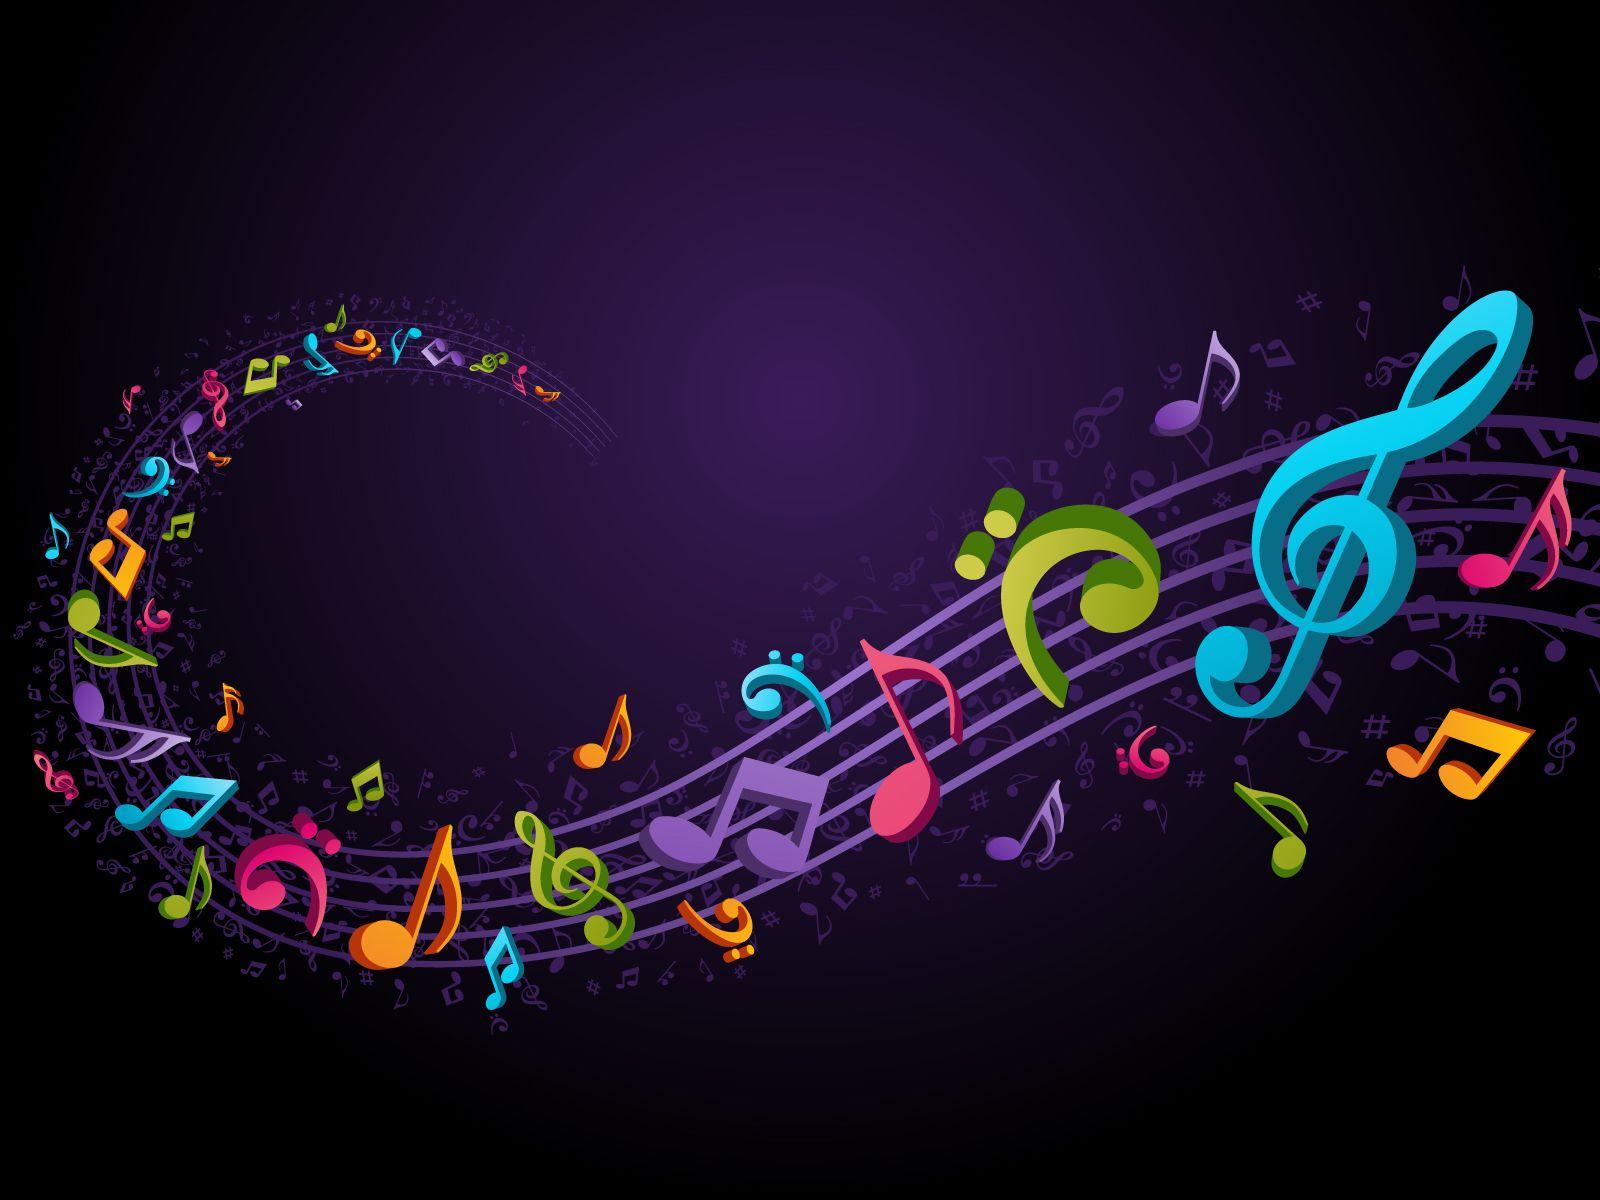 Music Wallpaper, Background, Image, Picture. Design Trends